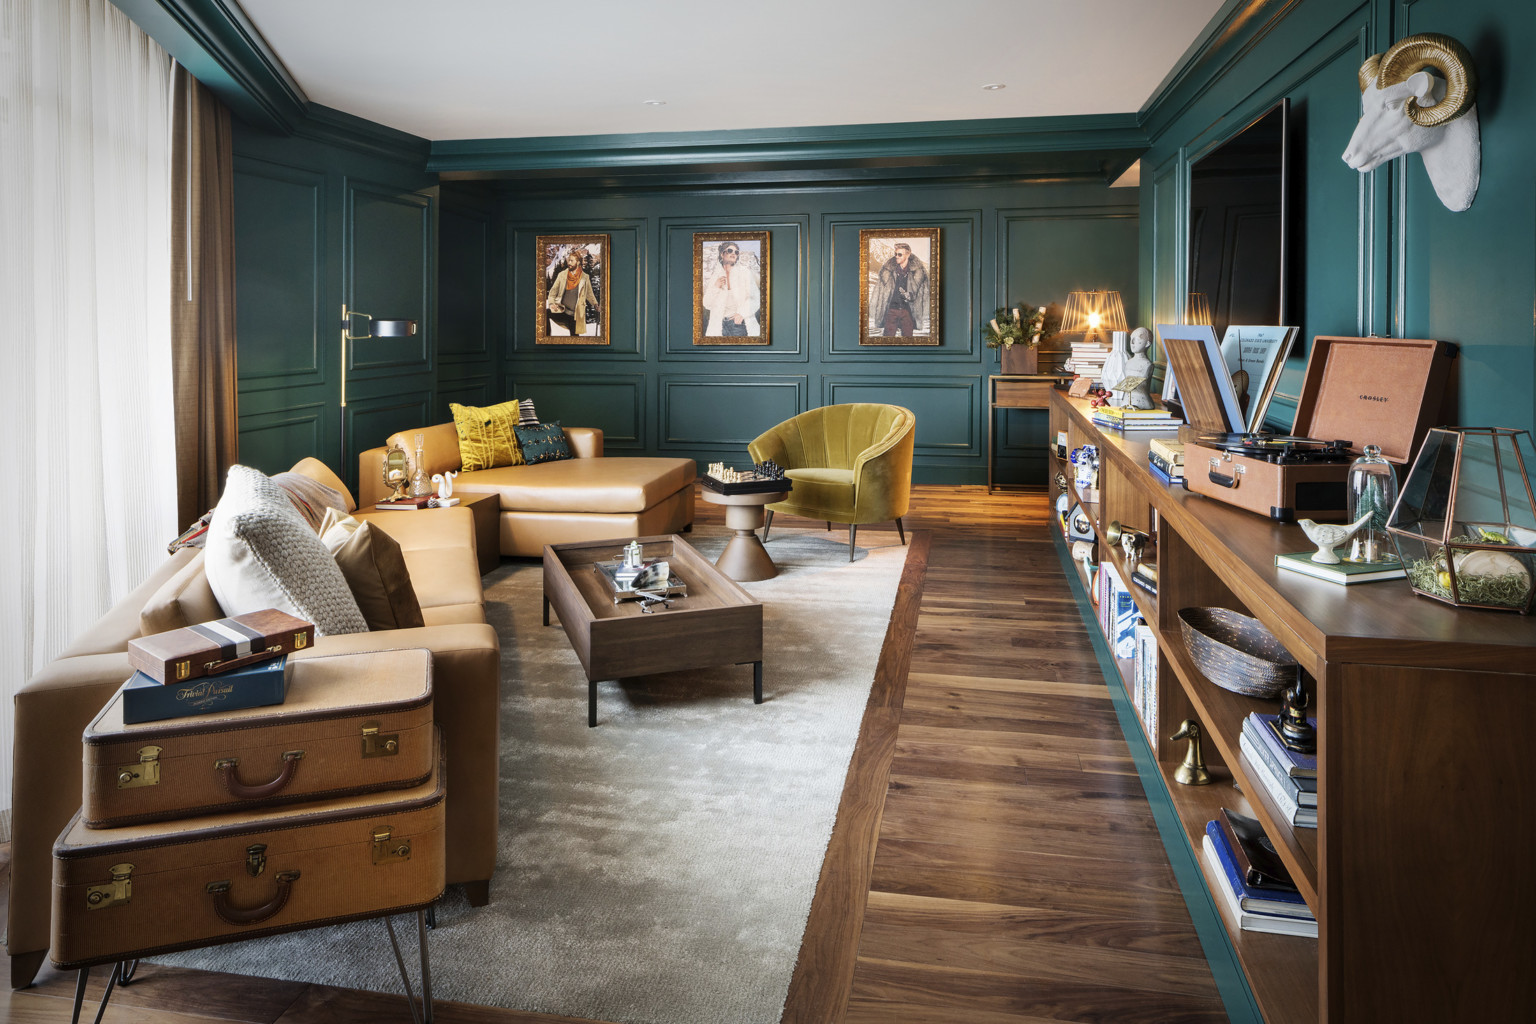 Sitting room with dark green molded walls. Light brown leather couch and yellow velvet chair with wood coffee table and shelf